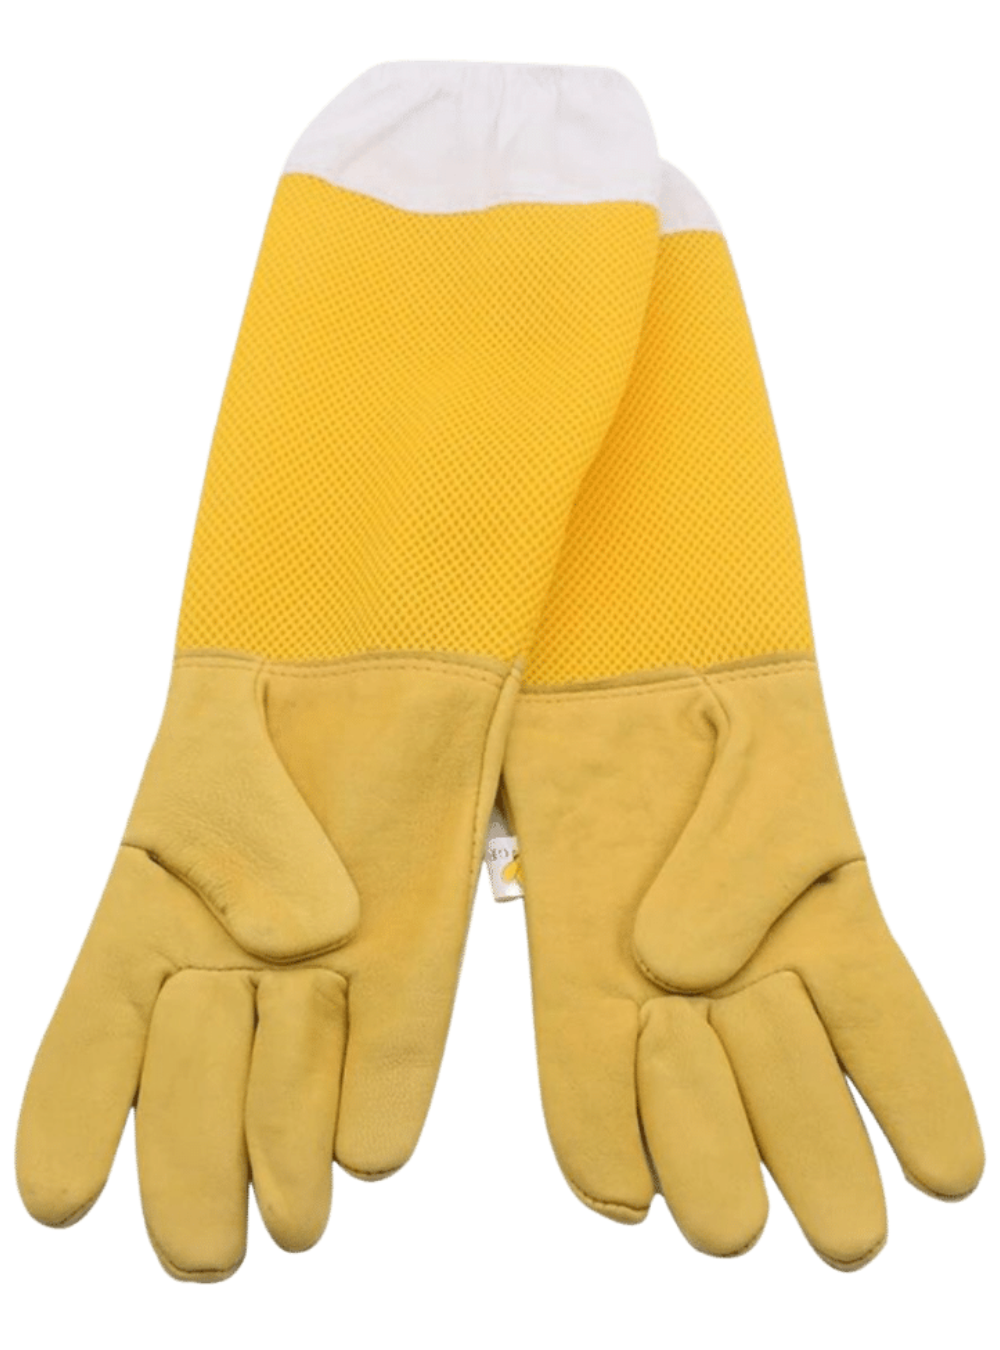 Yellow Beekeeping Protective Gloves breathable and comfortable.